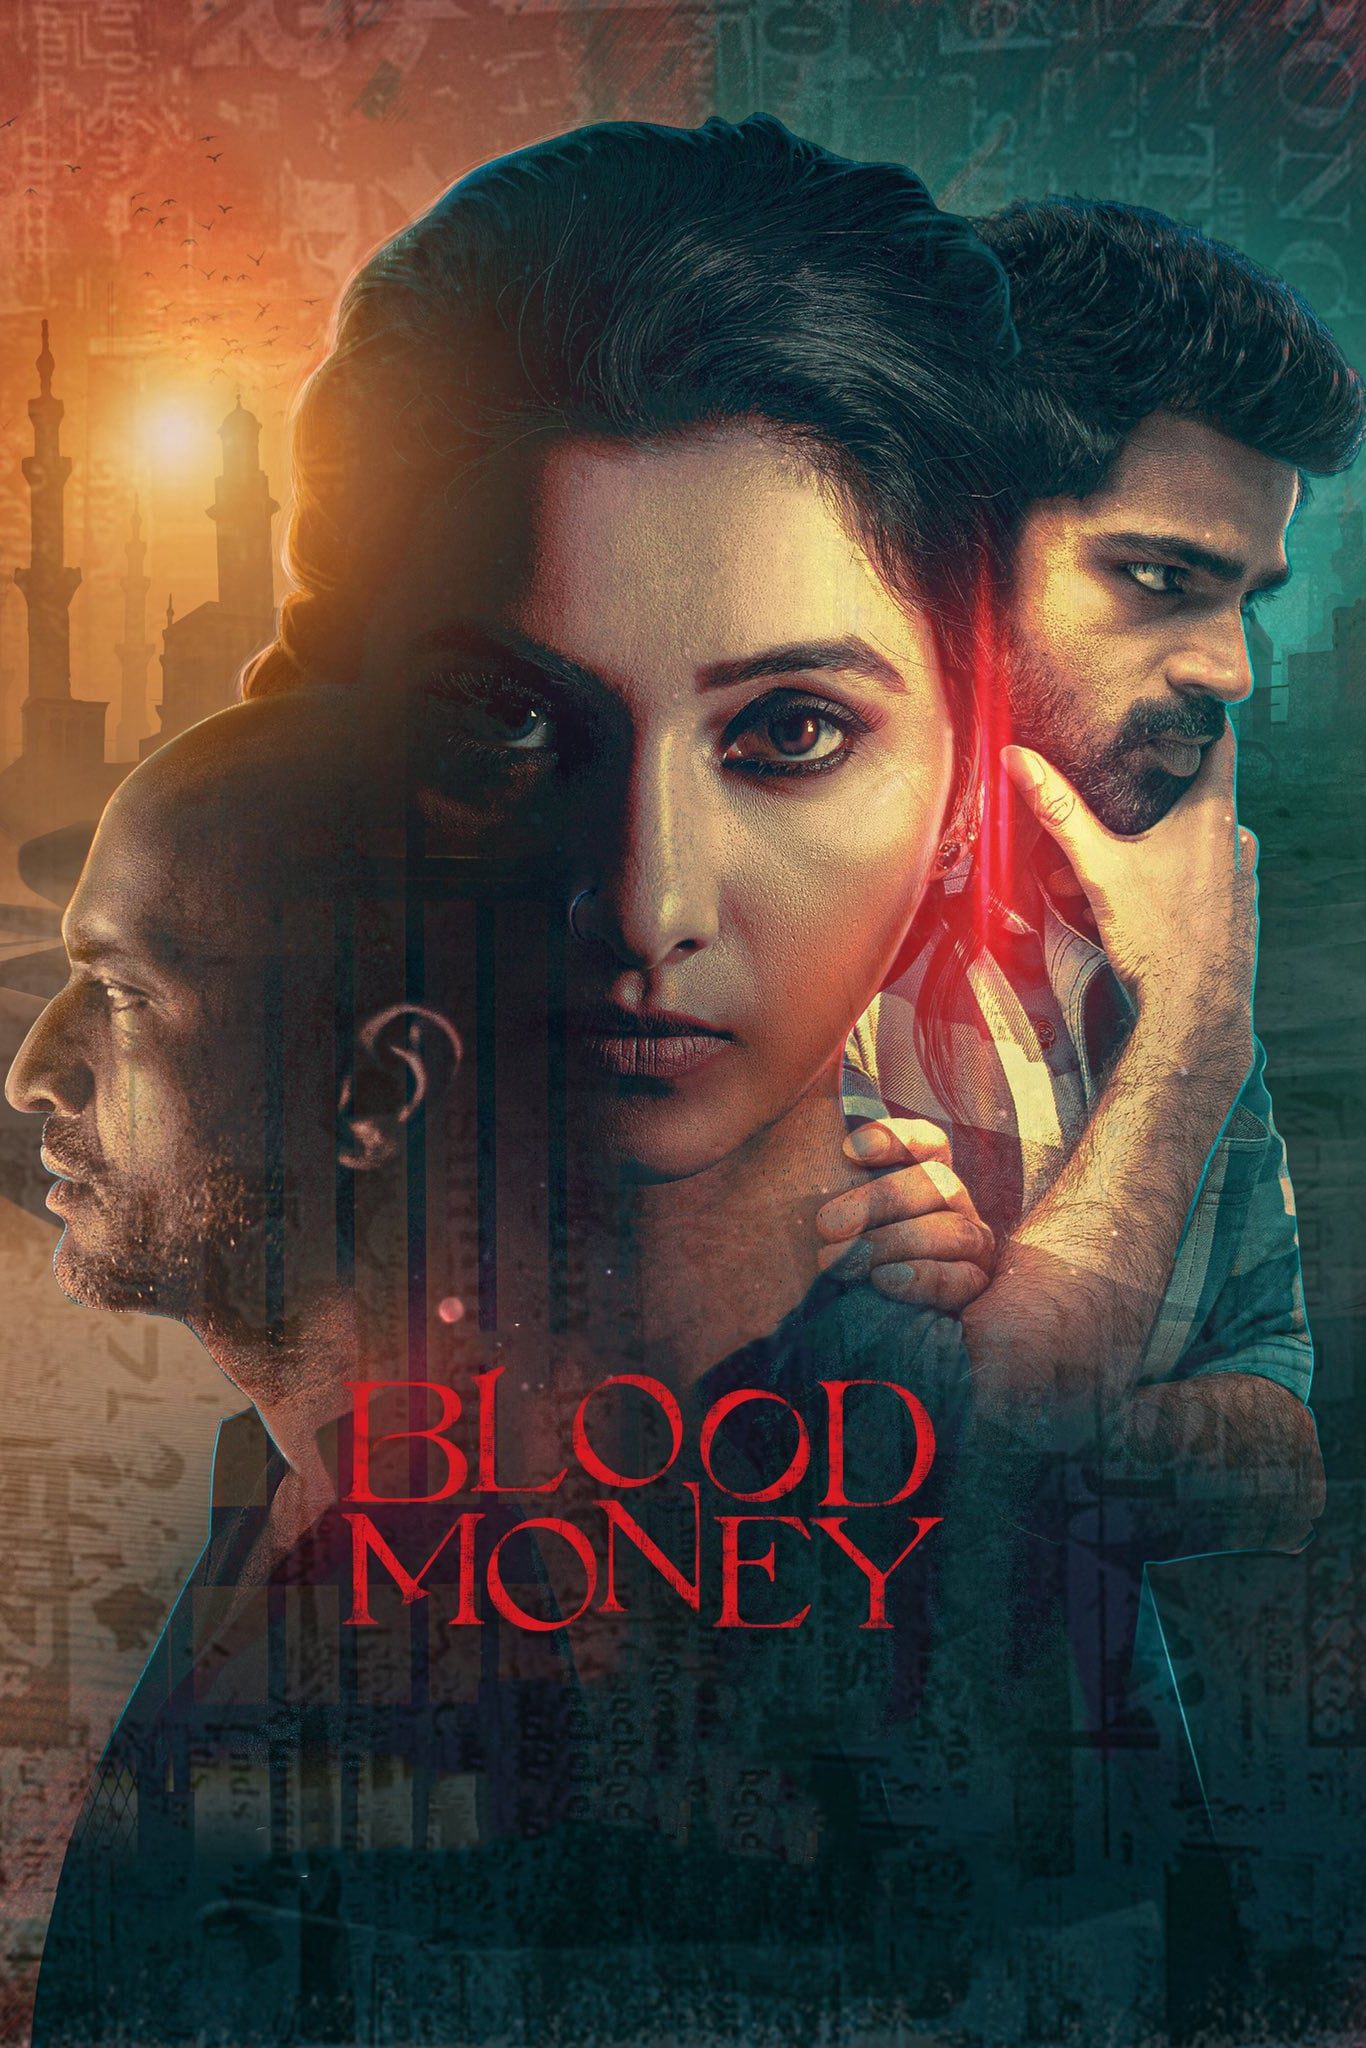 Poster for the movie "Blood Money"